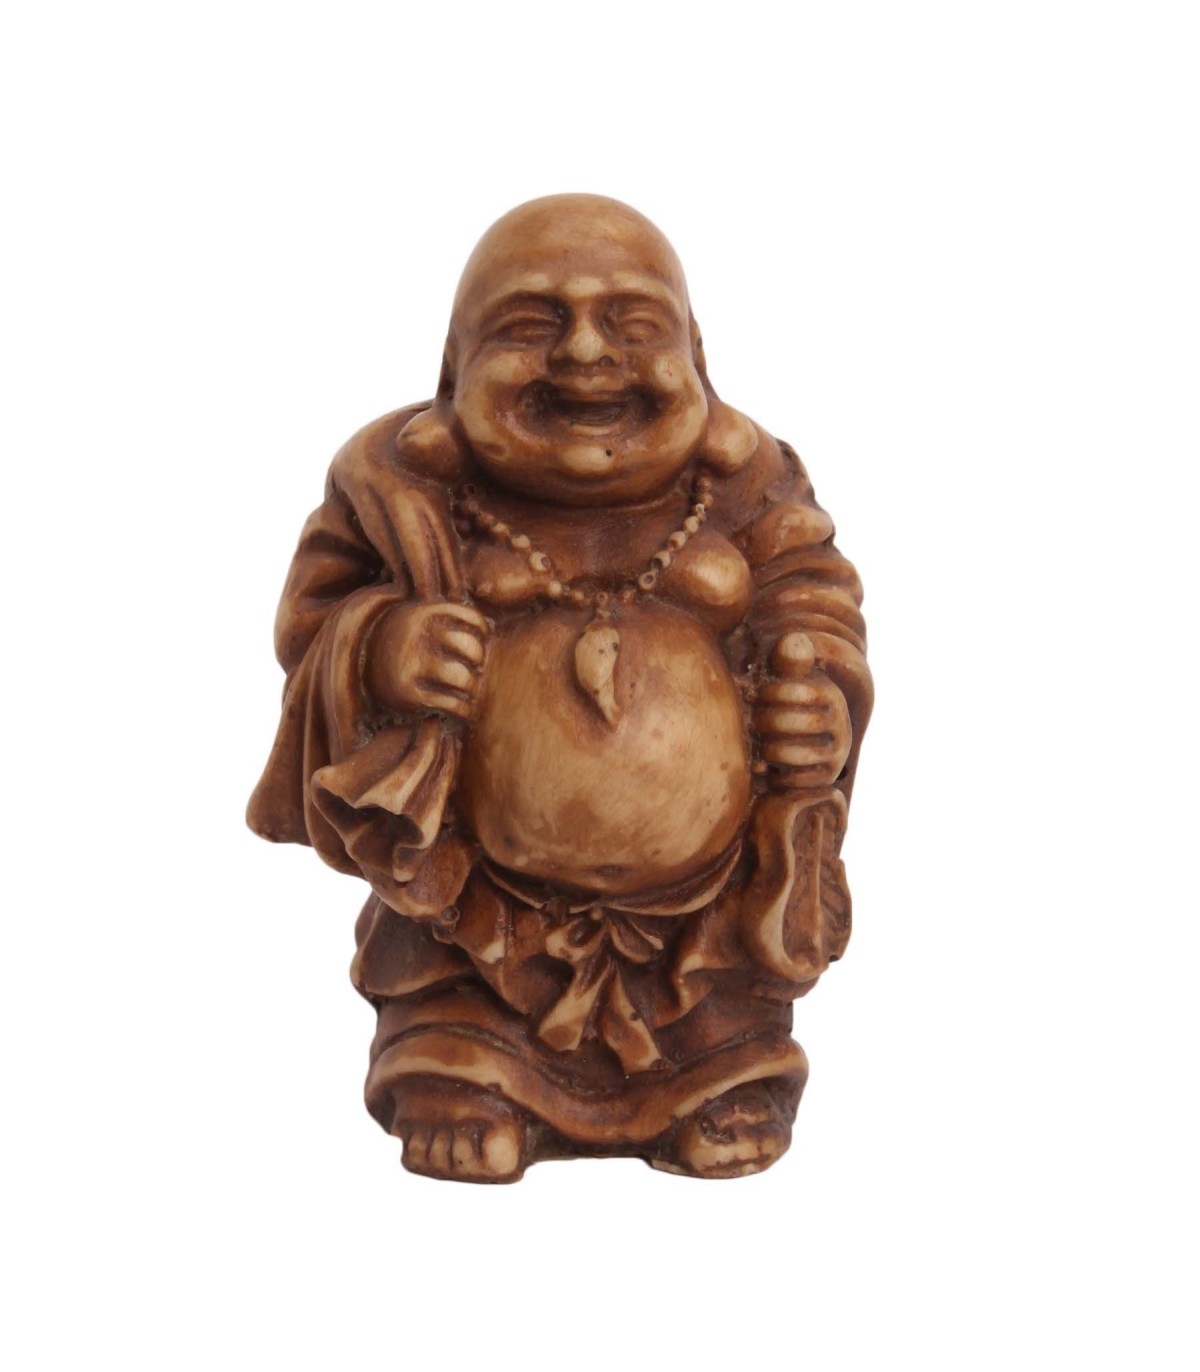 Laughing Buddha Carrying A Sack Of Good Fortune Buy Statues Online